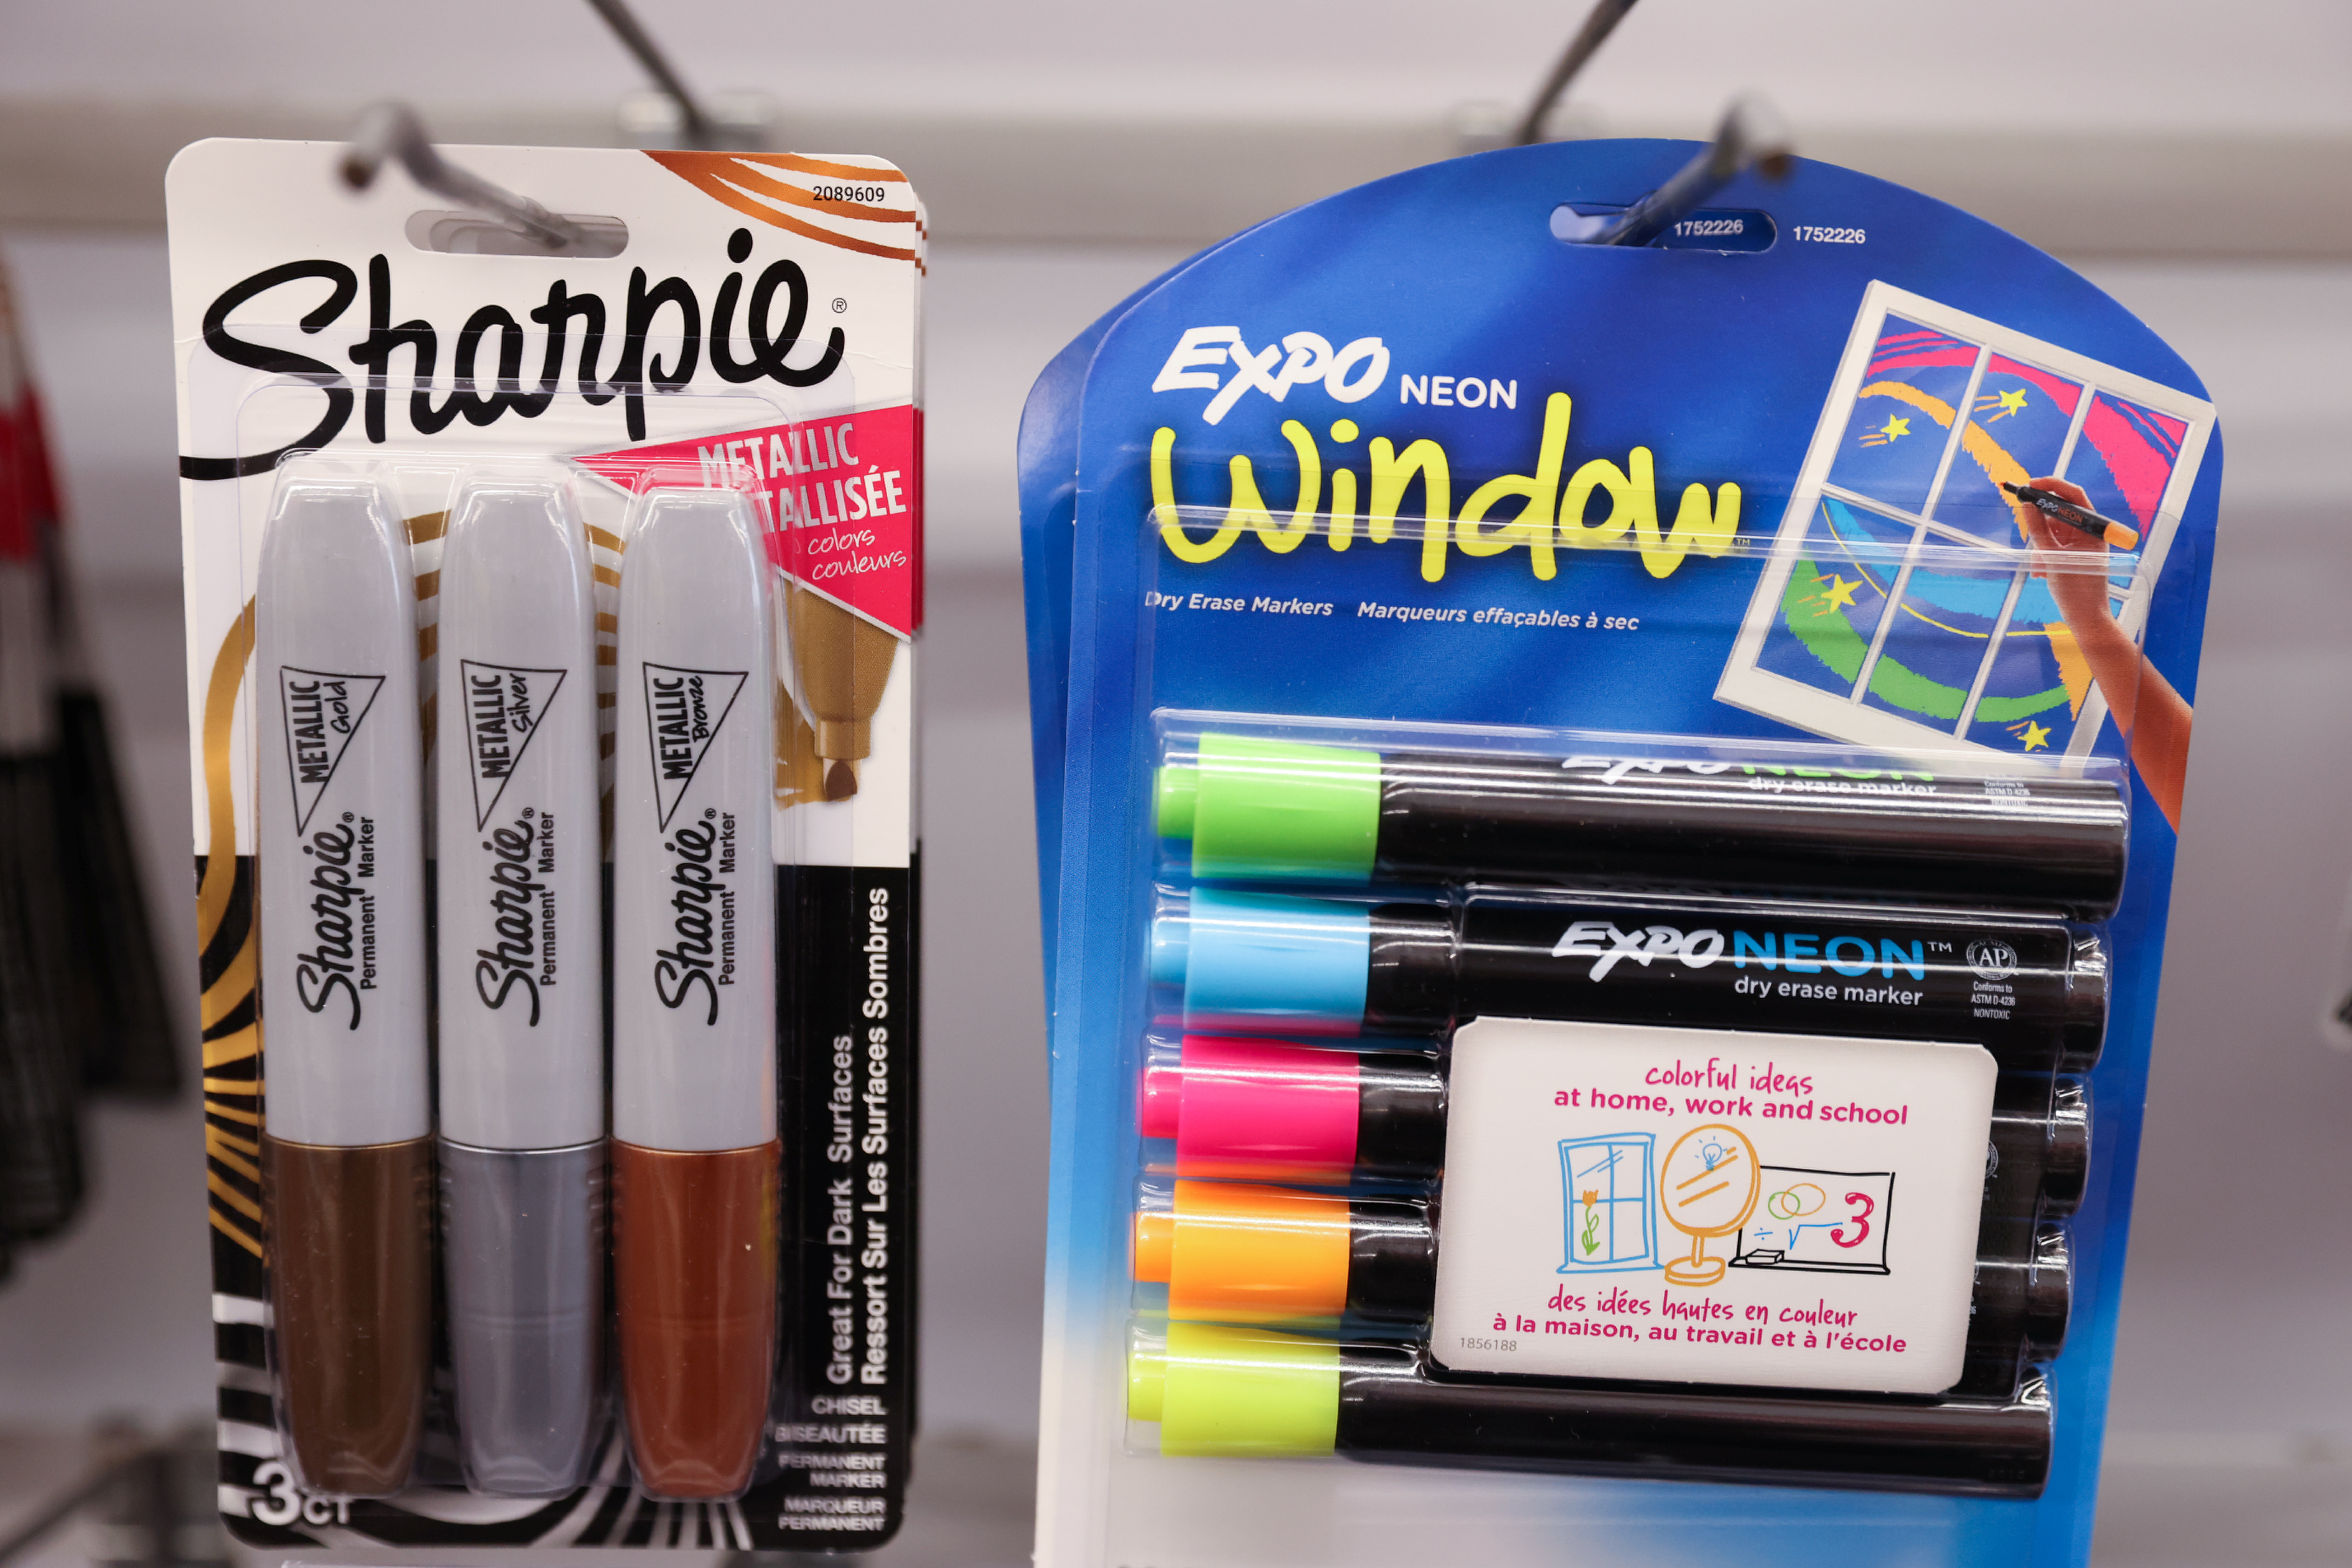 Sharpie markers owned by Newell Brands are seen for sale in a store in Manhattan, New York City